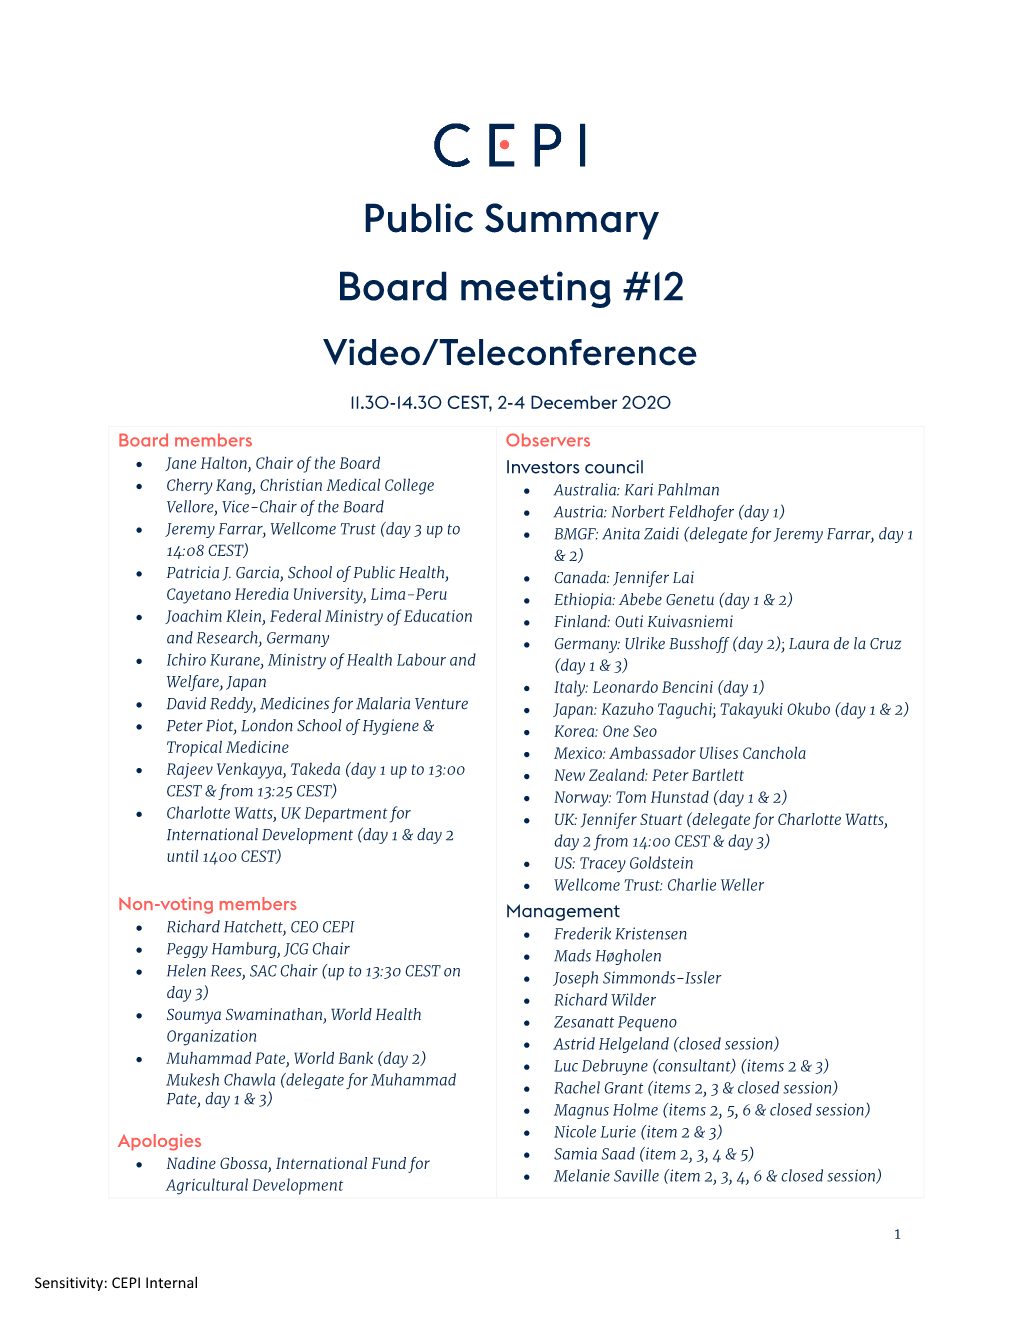 Public Summary Board Meeting #12 Video/Teleconference